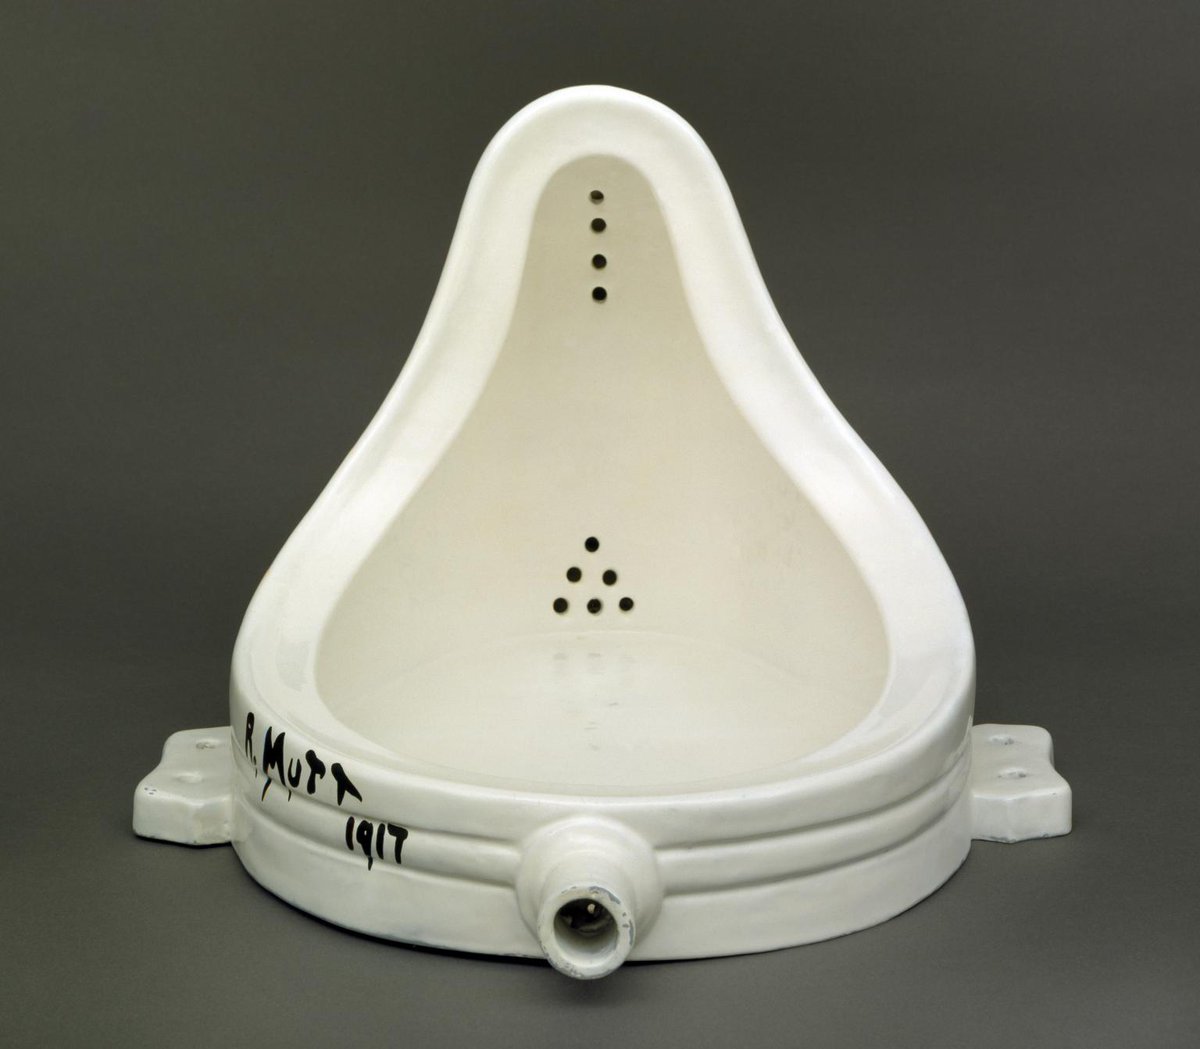 Re: Duchamp: the genius of Fountain, a piece in which he took a common urinal, turned it upside down, and displayed it in a gallery, is that he pulled the focus from the artwork itself, and liberated art itself from centuries of oil paintings of pears and landscapes, to concept